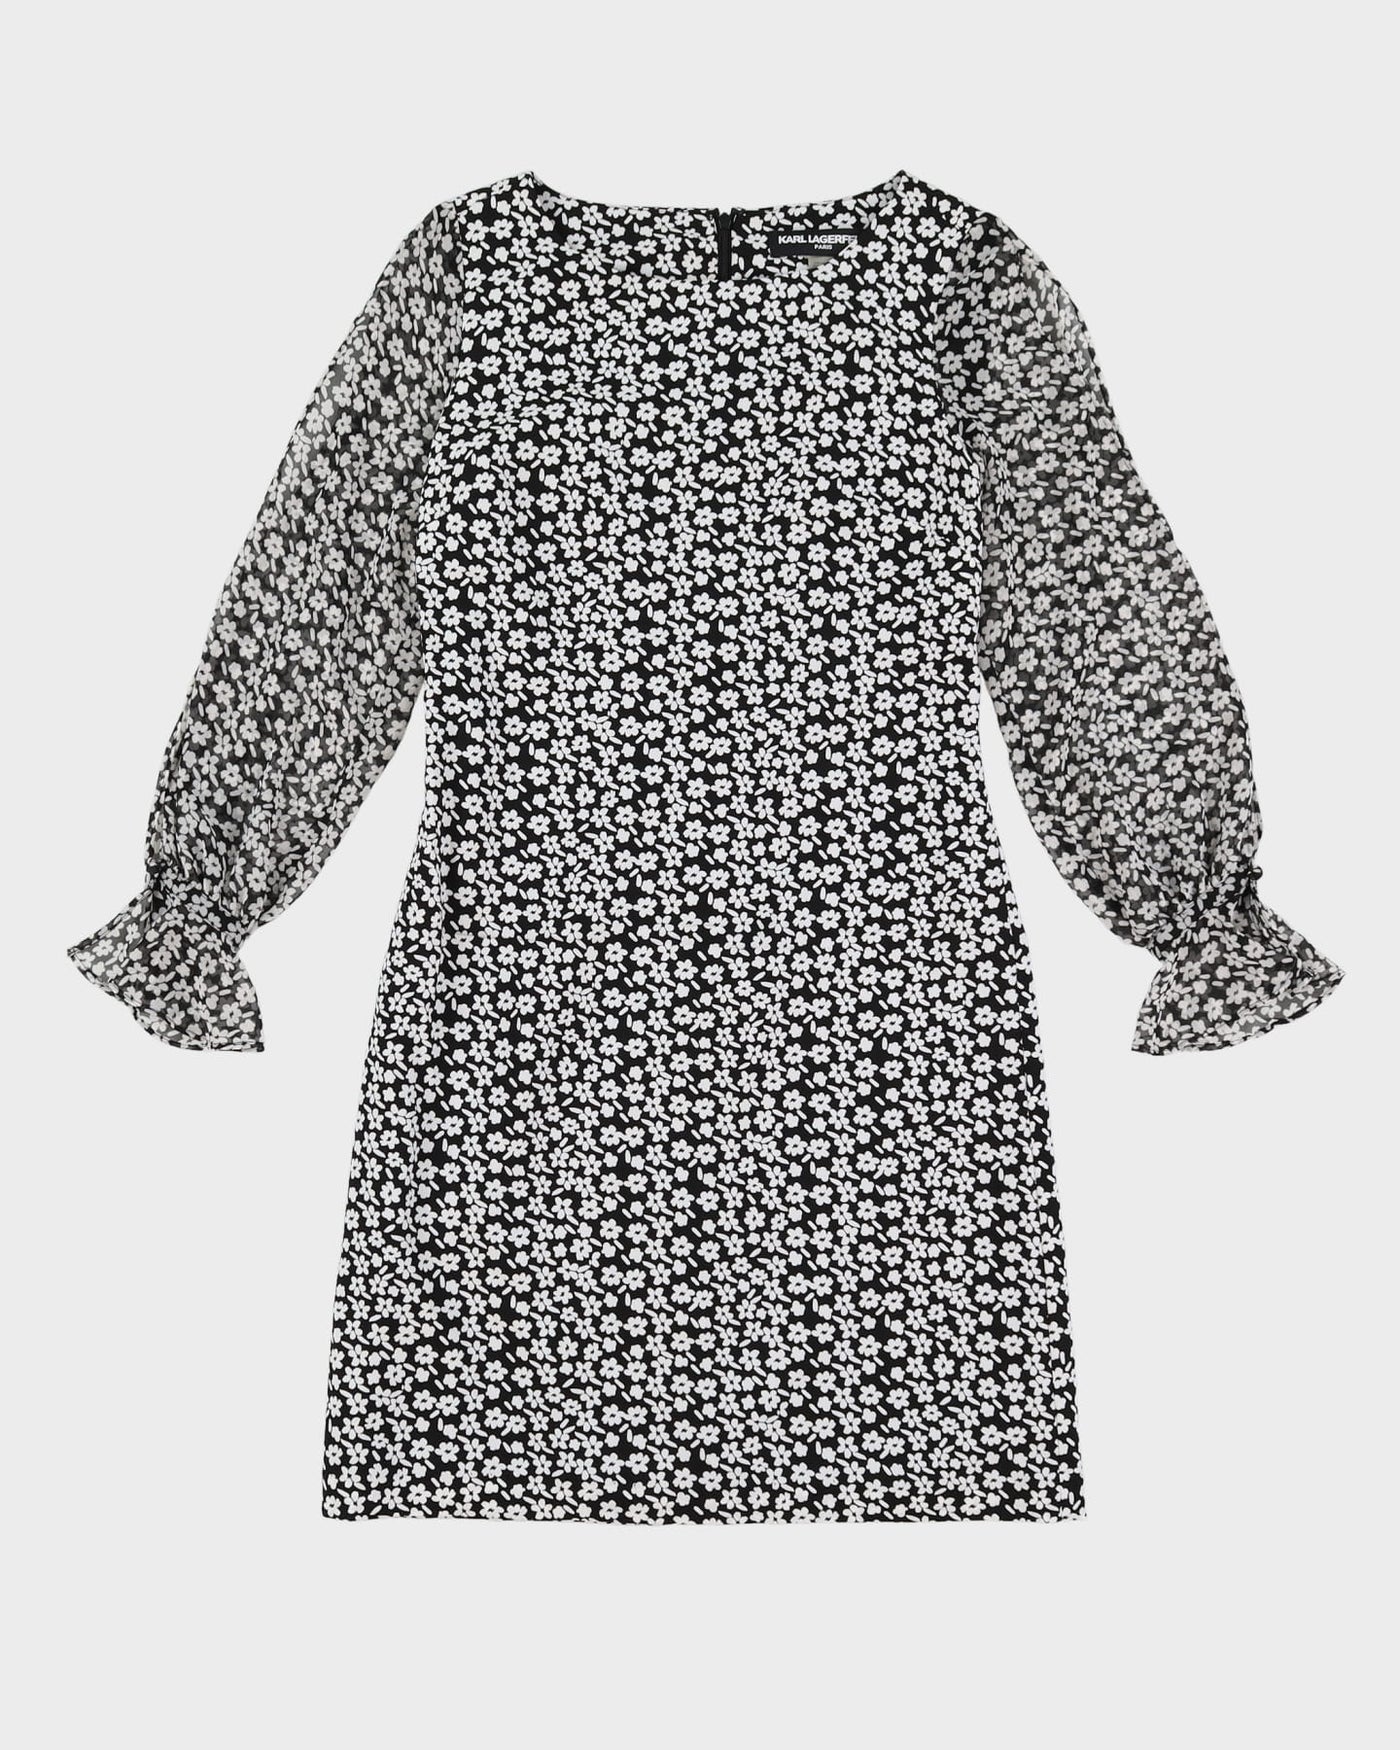 Karl Lagerfeld Black And White Patterned Dress - XS